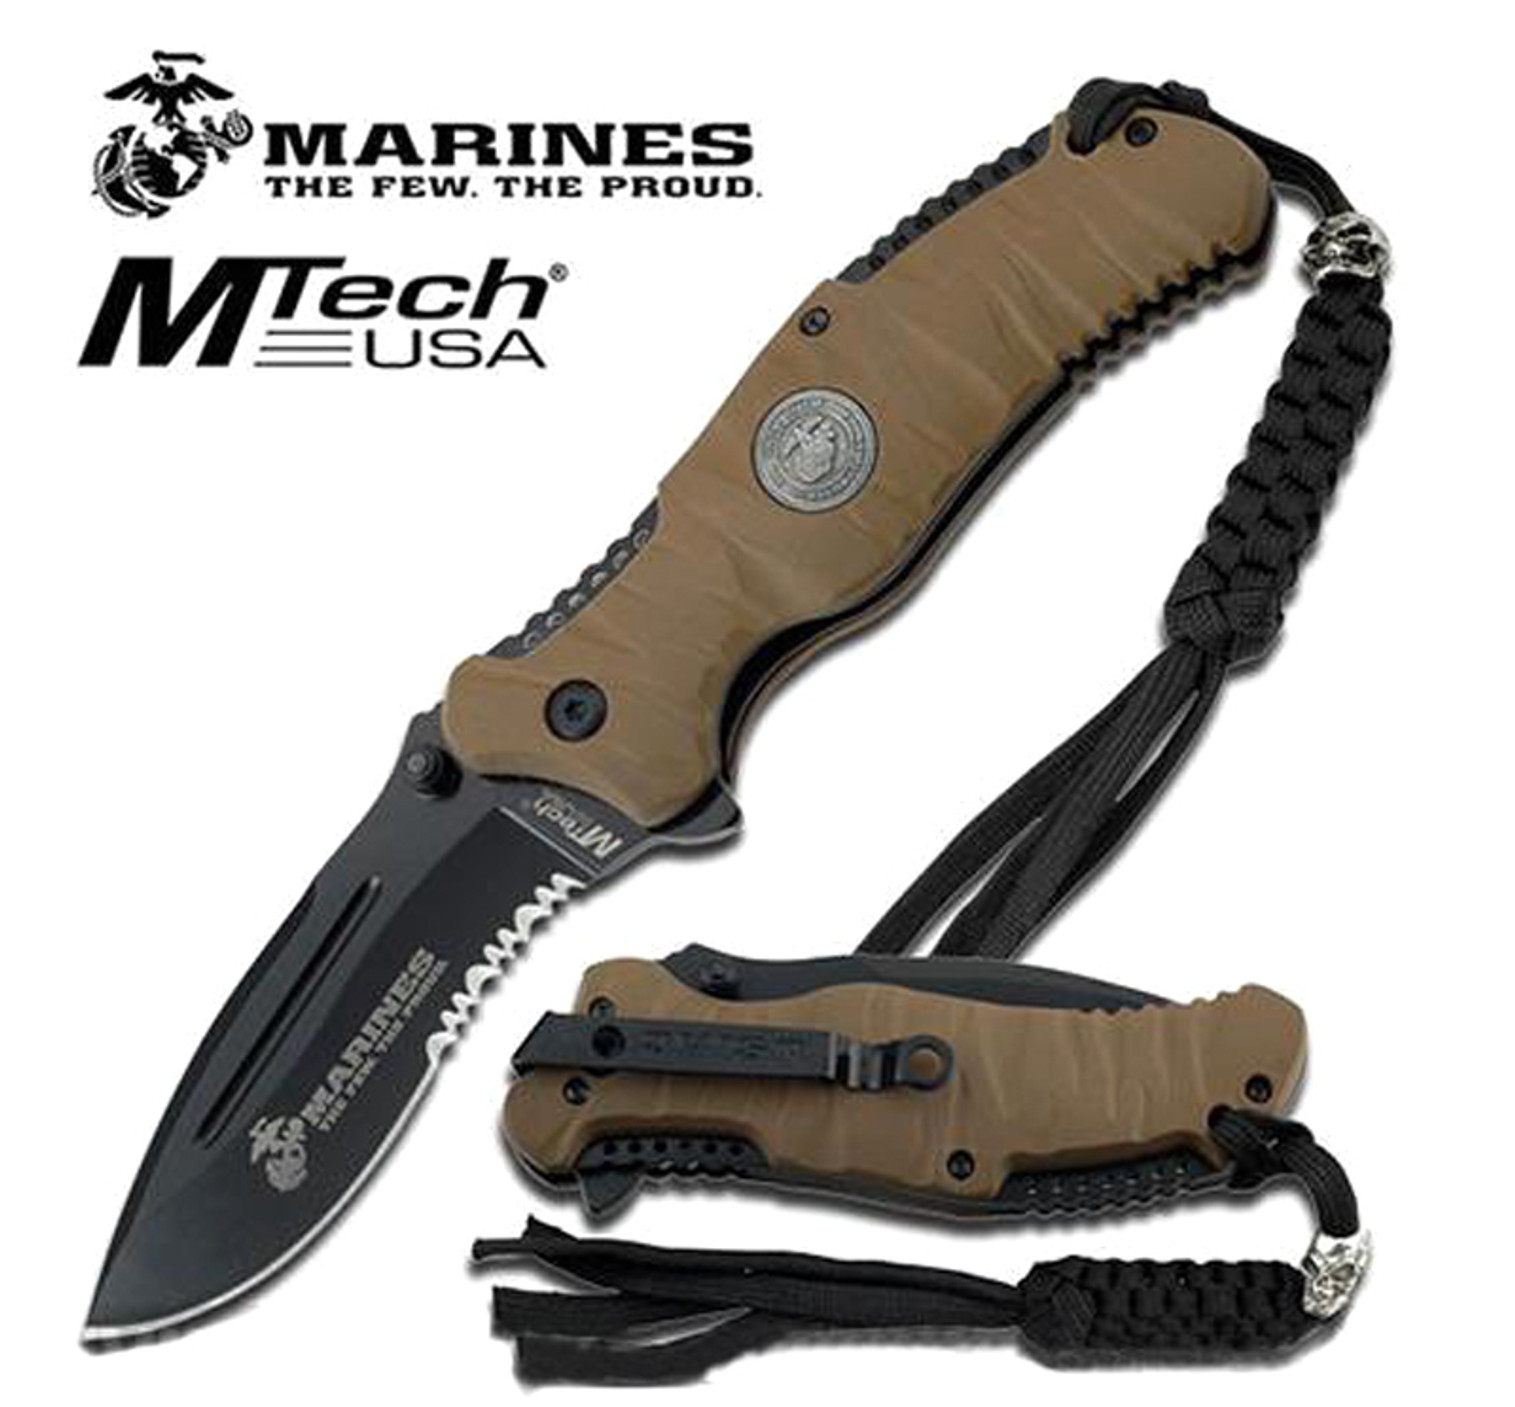 USMC Marine Reaper Assisted Opening Folding Knife with 3 5/8" Blade - Desert